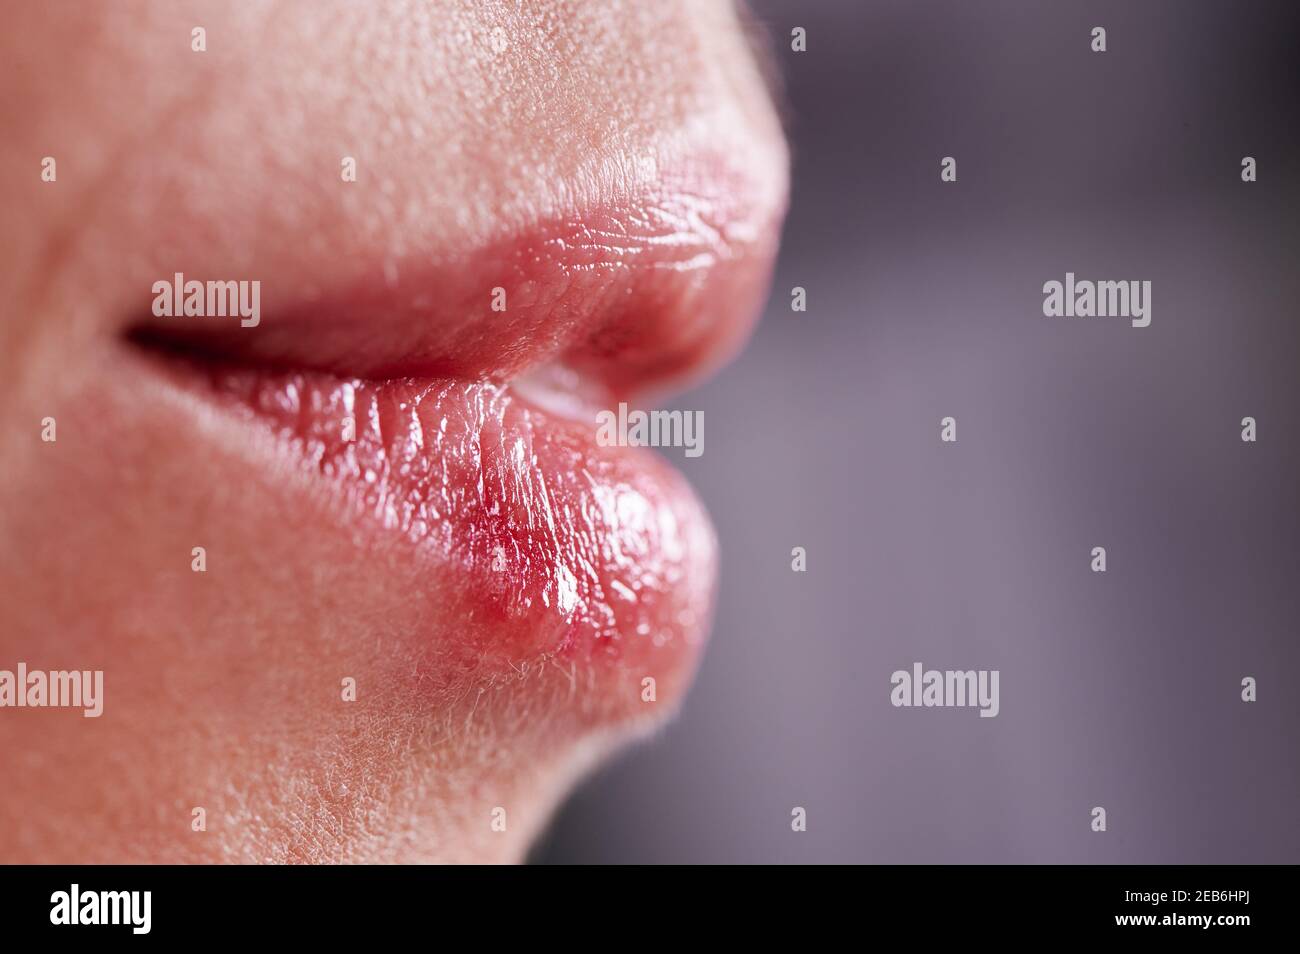 Macro photography of female lips suffering from herpes. Pimples on lower lip. Common cold virus herpes. Concept of healthcare Stock Photo